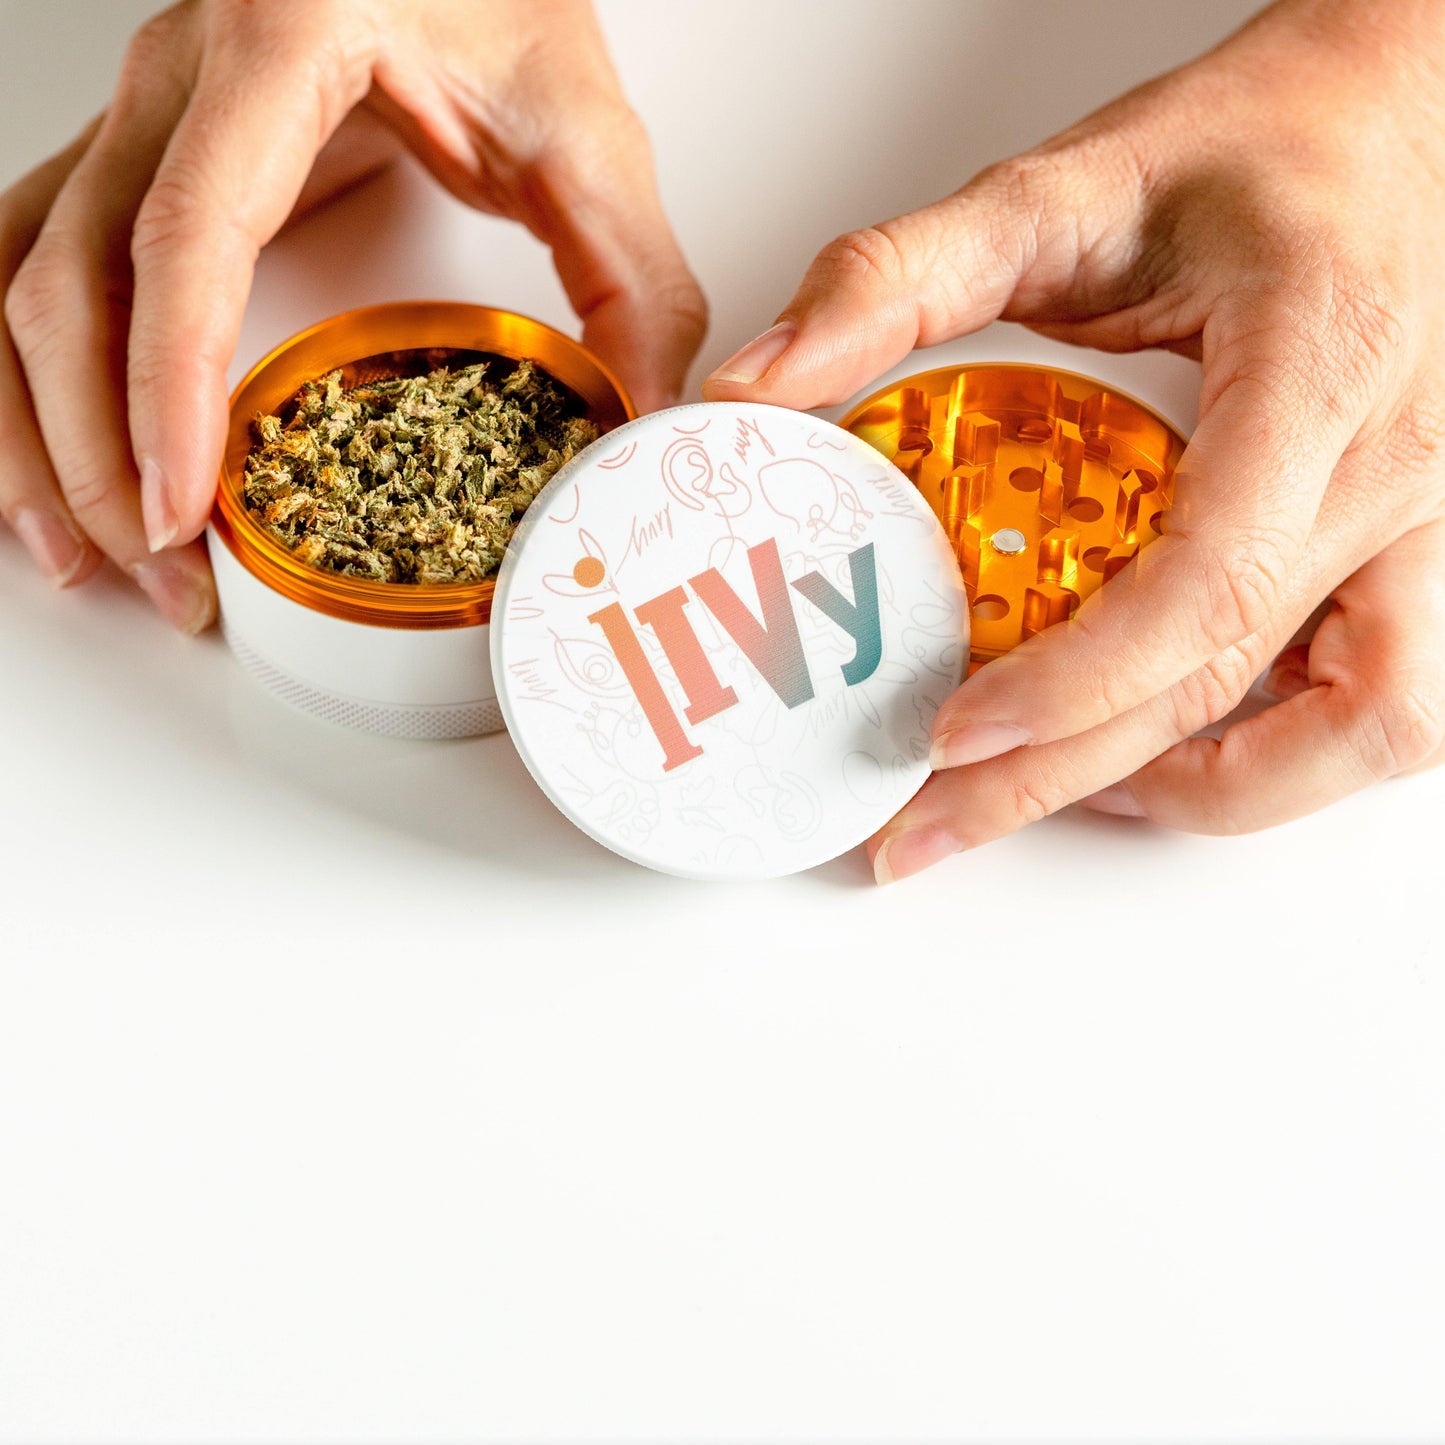 iivy marijuana weed accessories soft touch grinder white in use